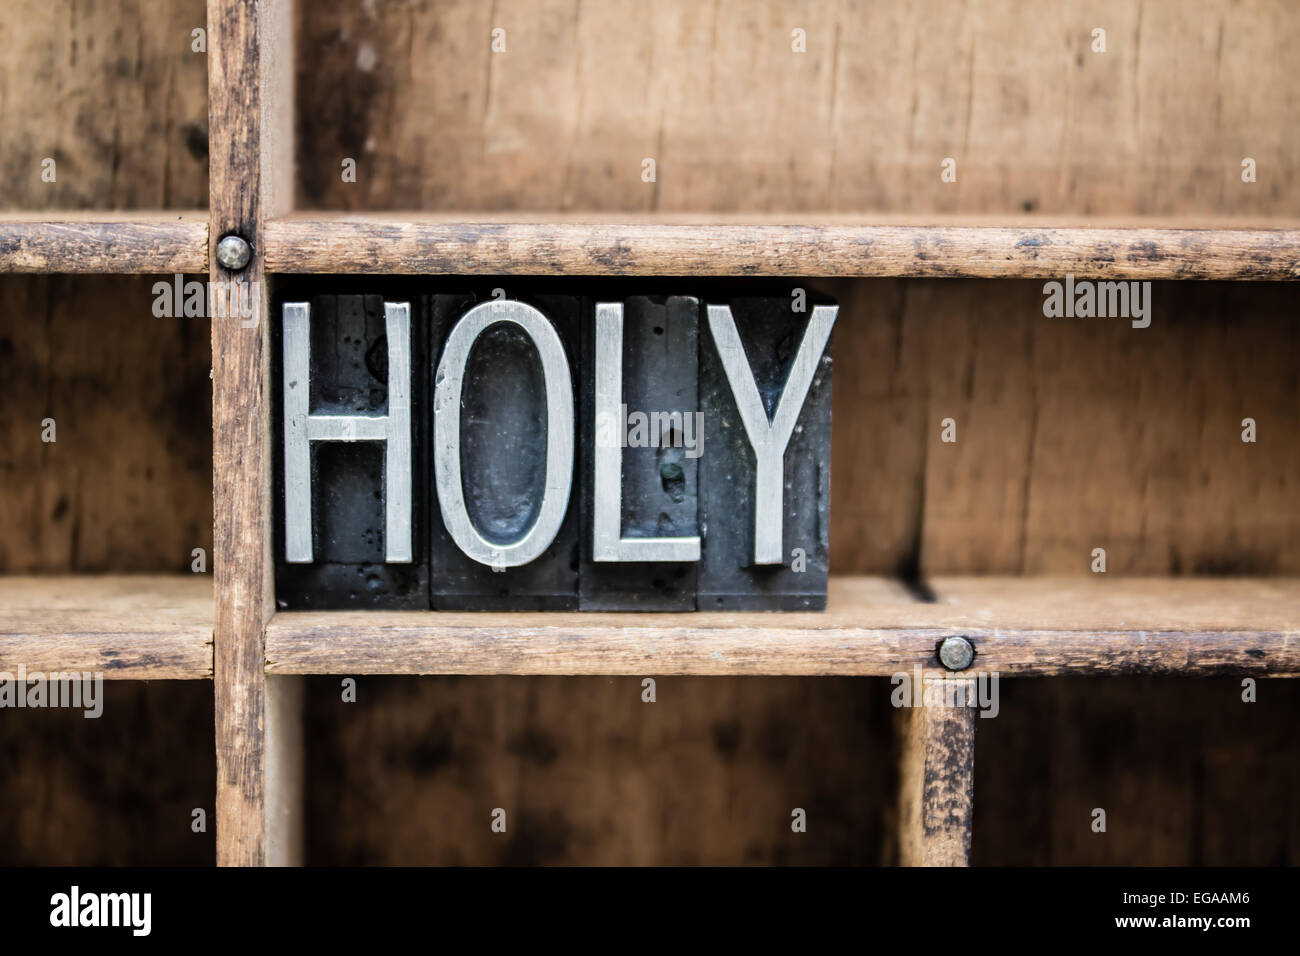 The word 'HOLY' written in vintage metal letterpress type in a wooden drawer with dividers. Stock Photo